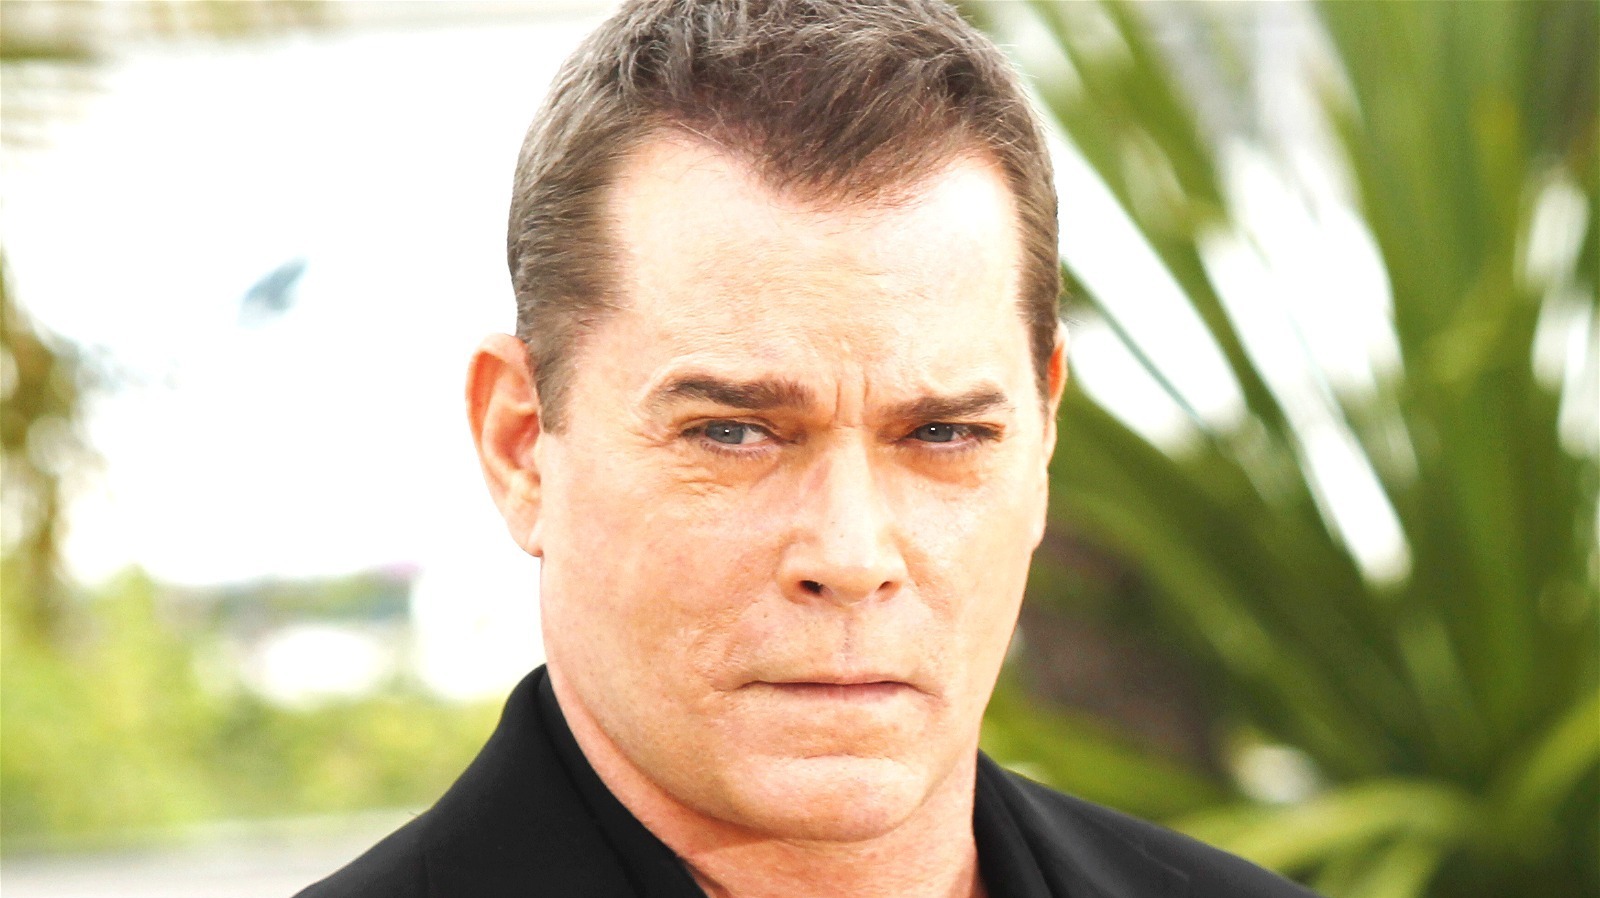 Who Could Ray Liotta Play In The Many Saints Of Newark?